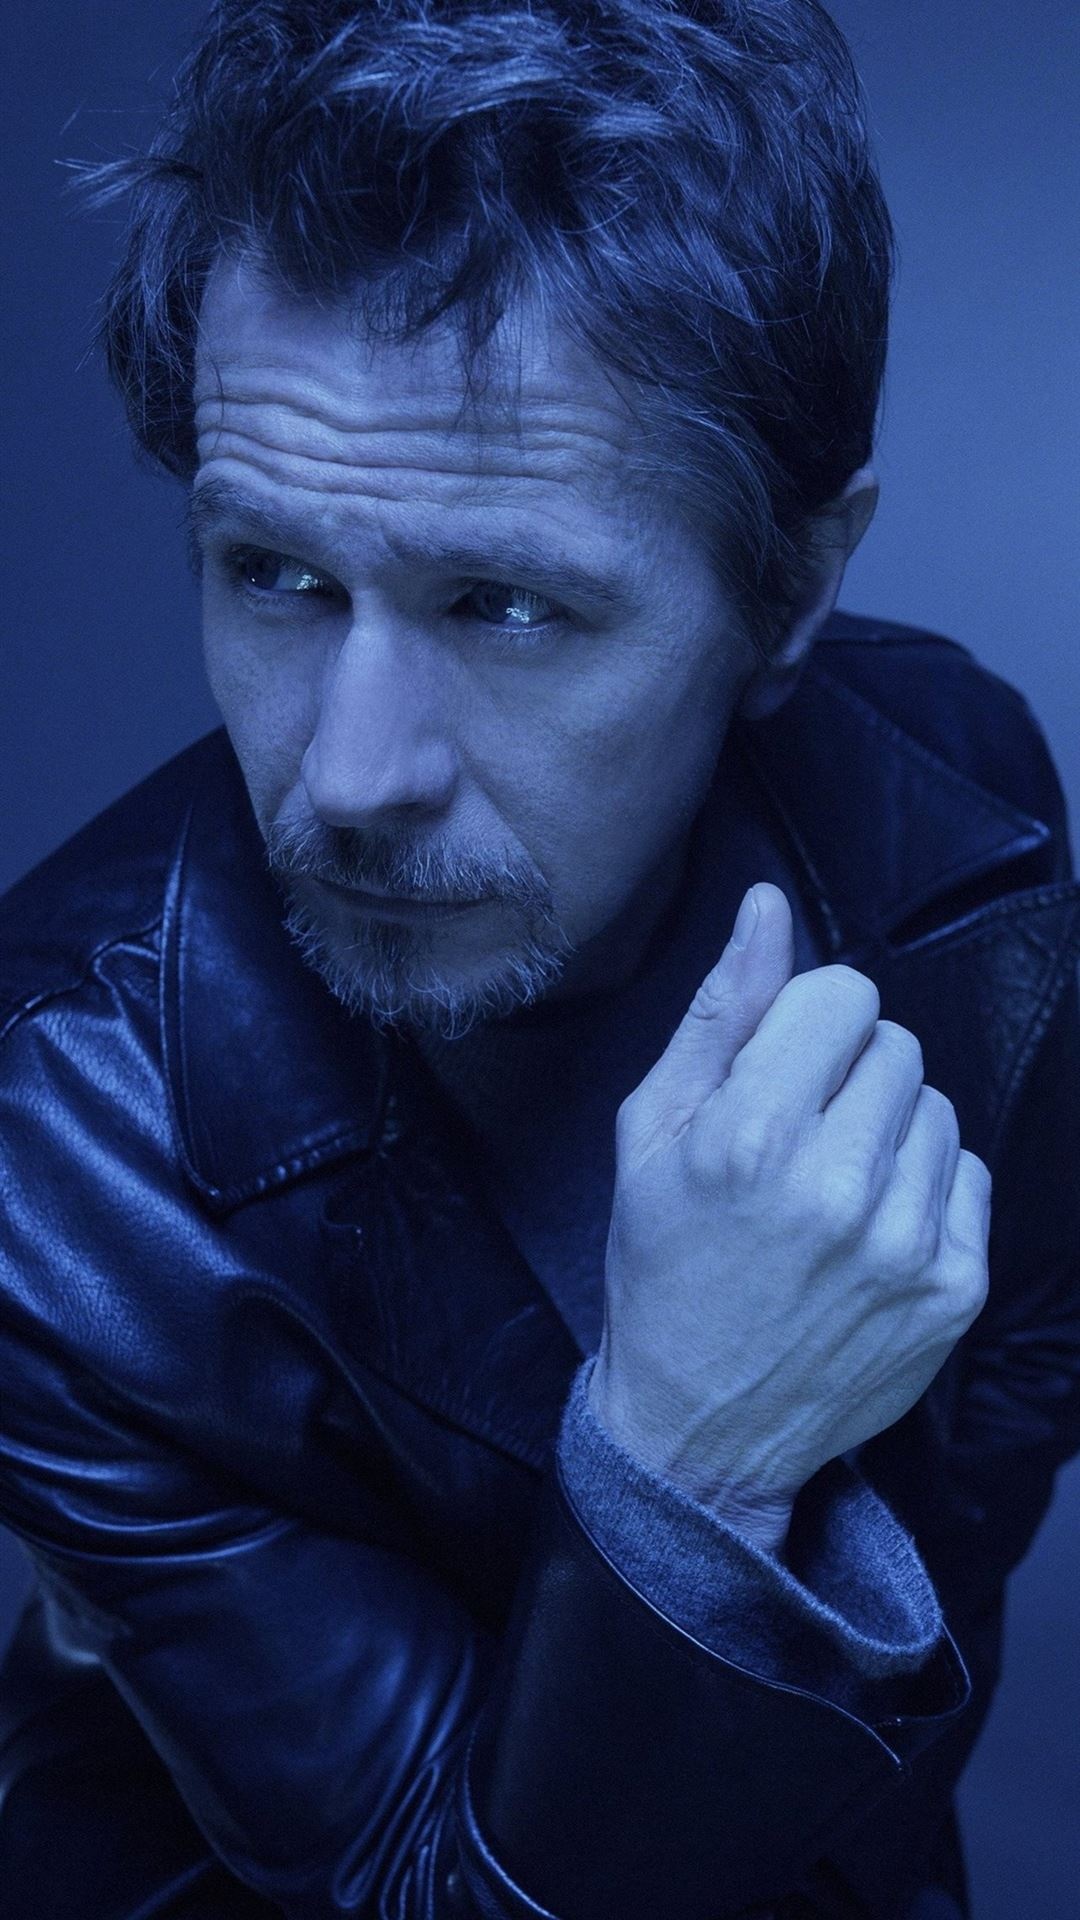 Gary Oldman, Featured on iPhone wallpapers, Actor's charisma, Iconic performances, 1080x1920 Full HD Phone